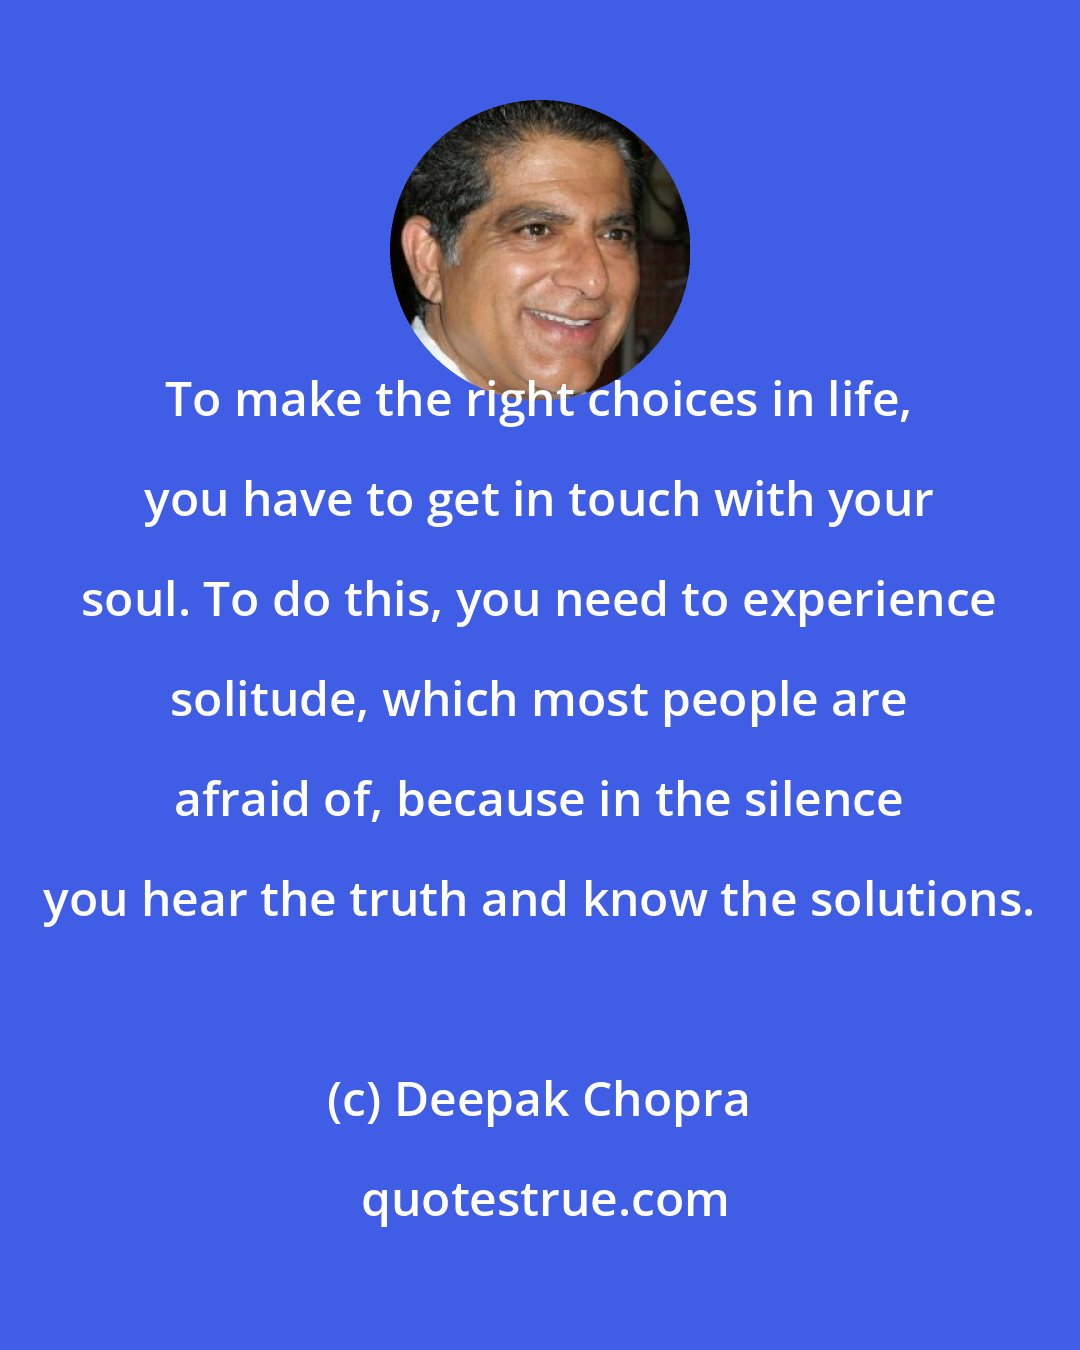 Deepak Chopra: To make the right choices in life, you have to get in touch with your soul. To do this, you need to experience solitude, which most people are afraid of, because in the silence you hear the truth and know the solutions.